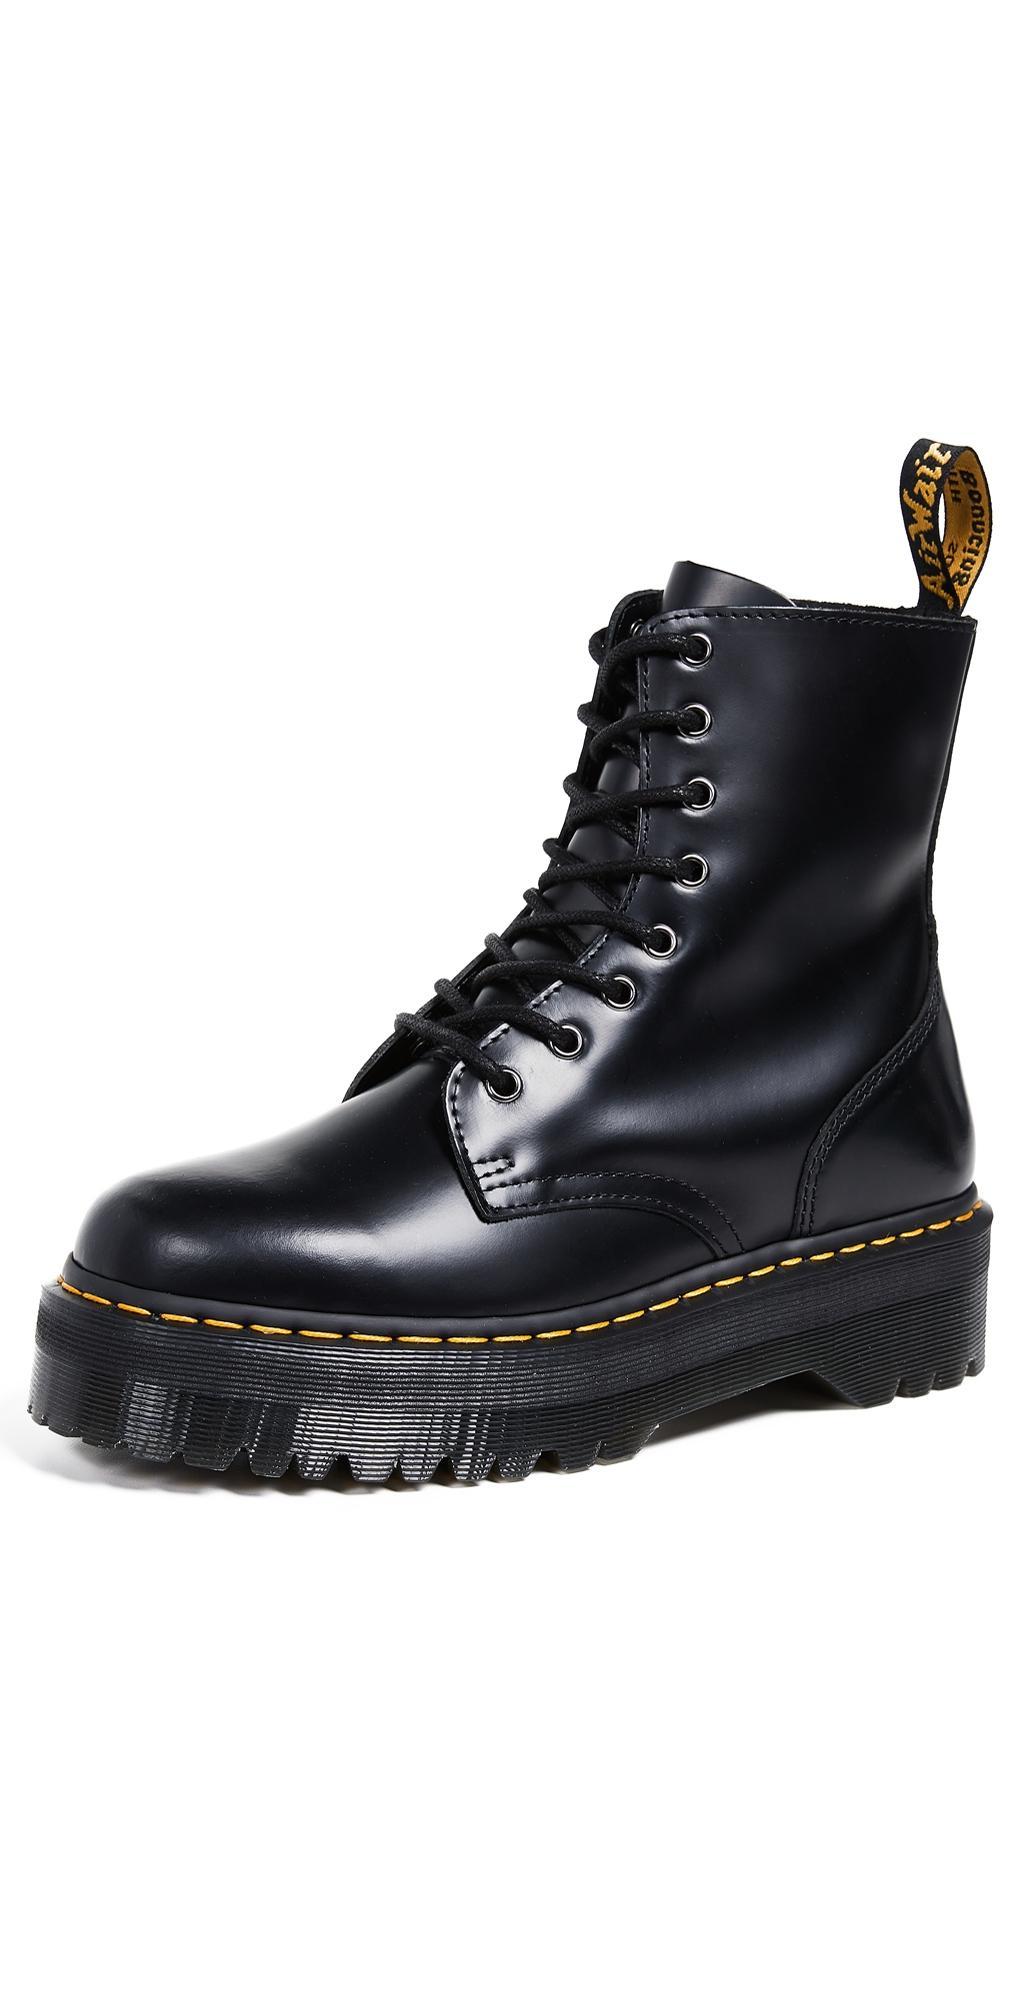 Dr. Martens Jadon Lace-Up Boots by Dr. Martens at Free People Product Image